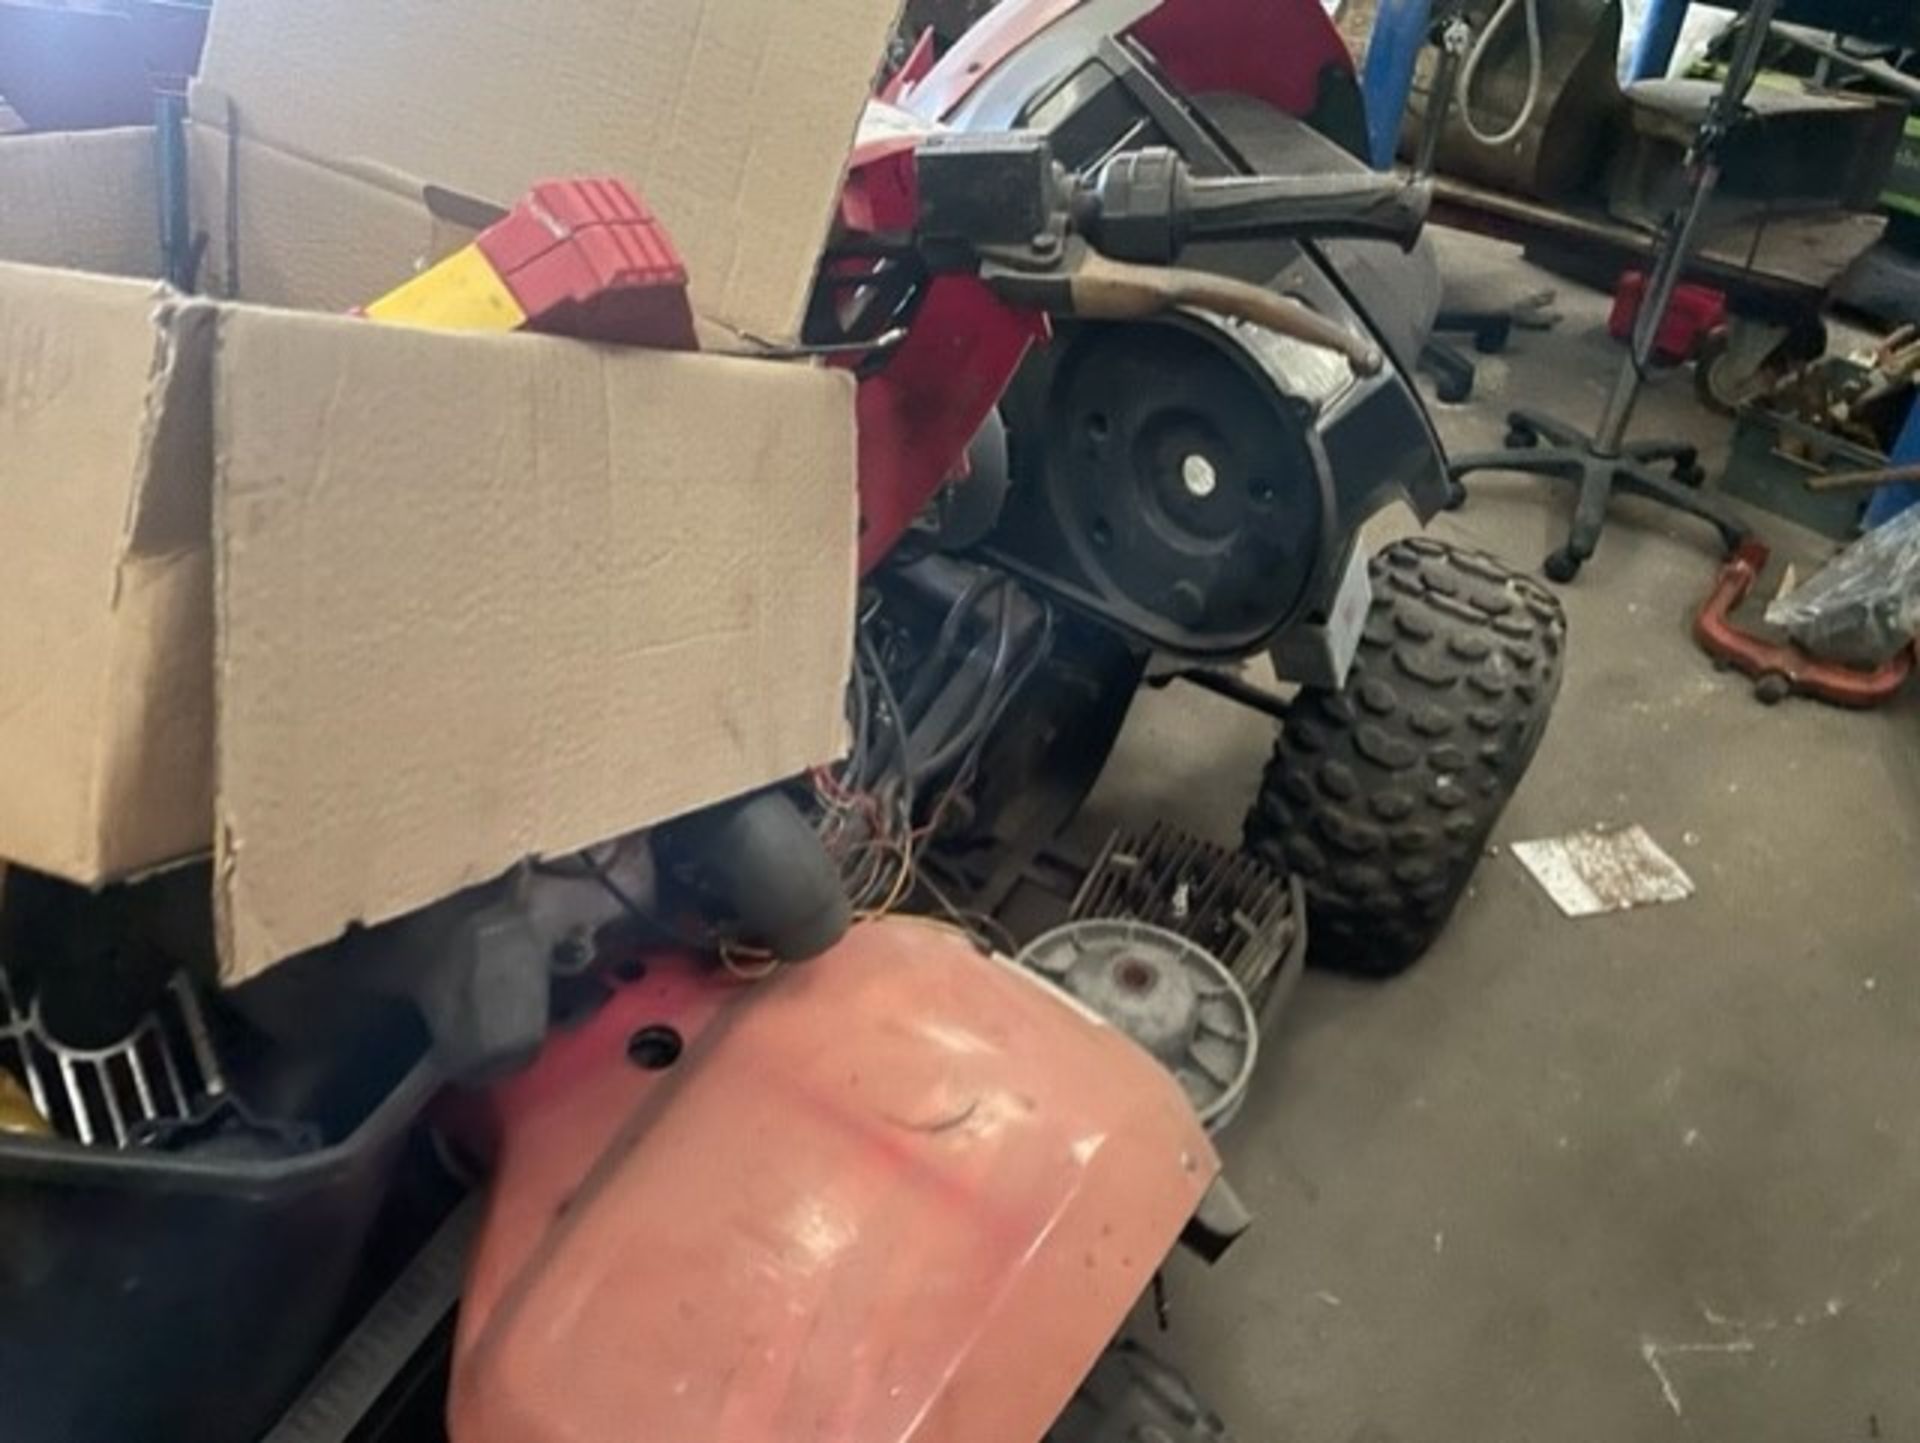 Polaris 250 2 stroke quad bike in bits as it needs a piston storey is I bought a piston but the - Image 2 of 8